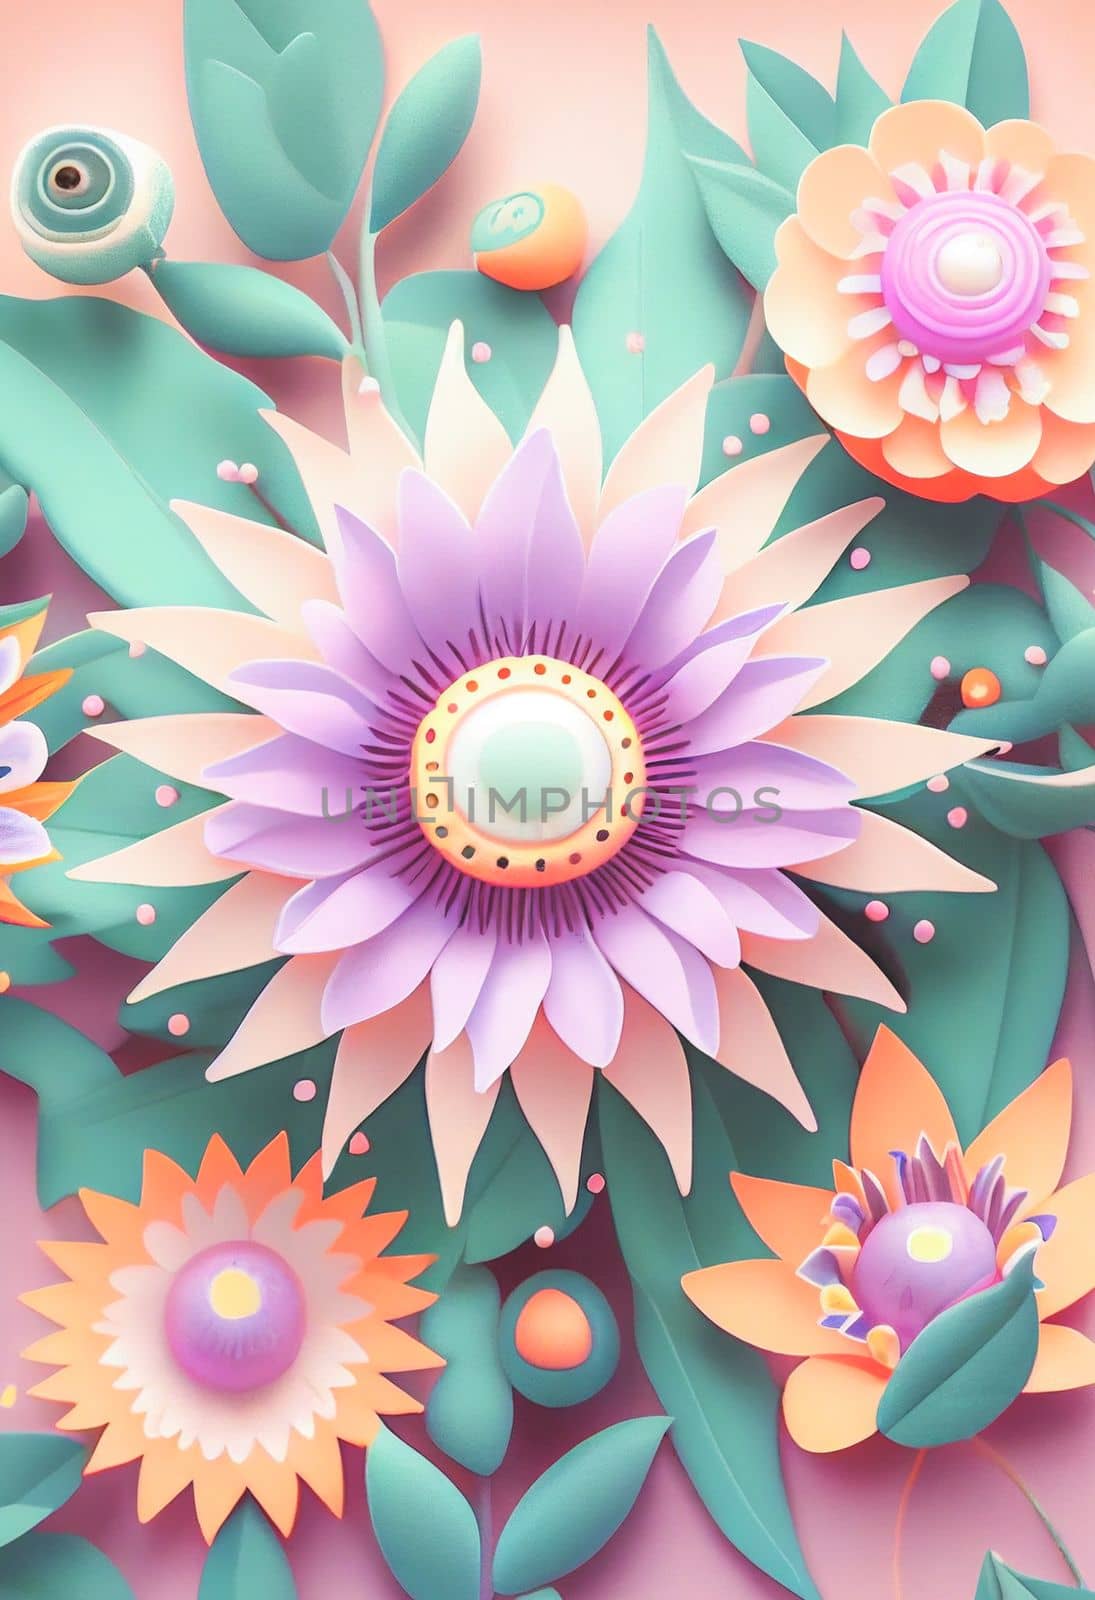 Cute 3D pastel passiflora flowers on a peaceful pastel background. Soft colors bring a soothing aesthetic. by FokasuArt